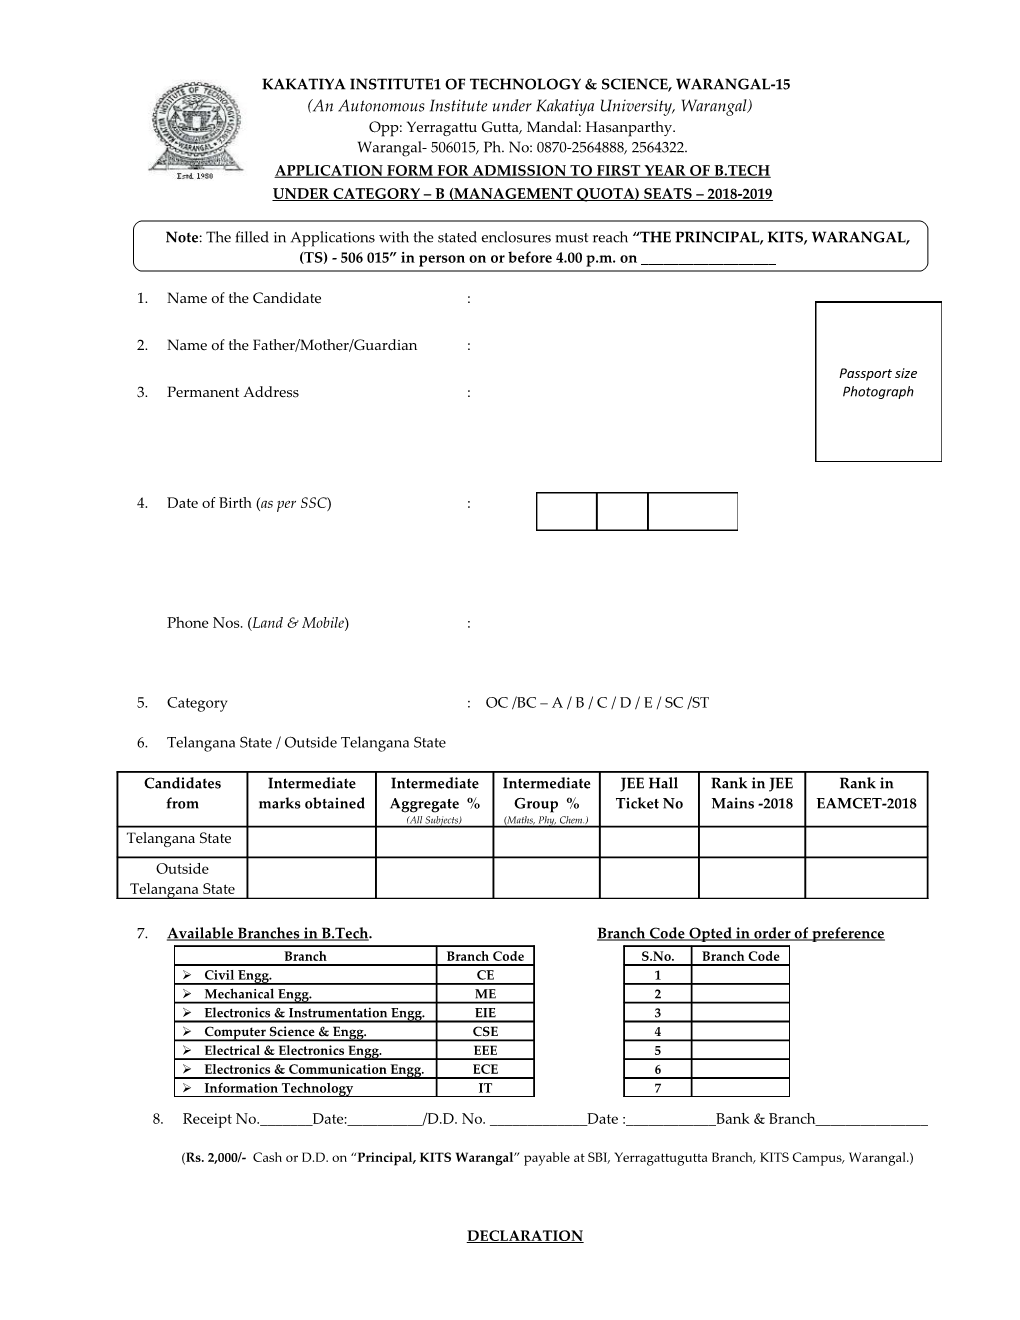 Application Form for Admission to First Year of B.Tech